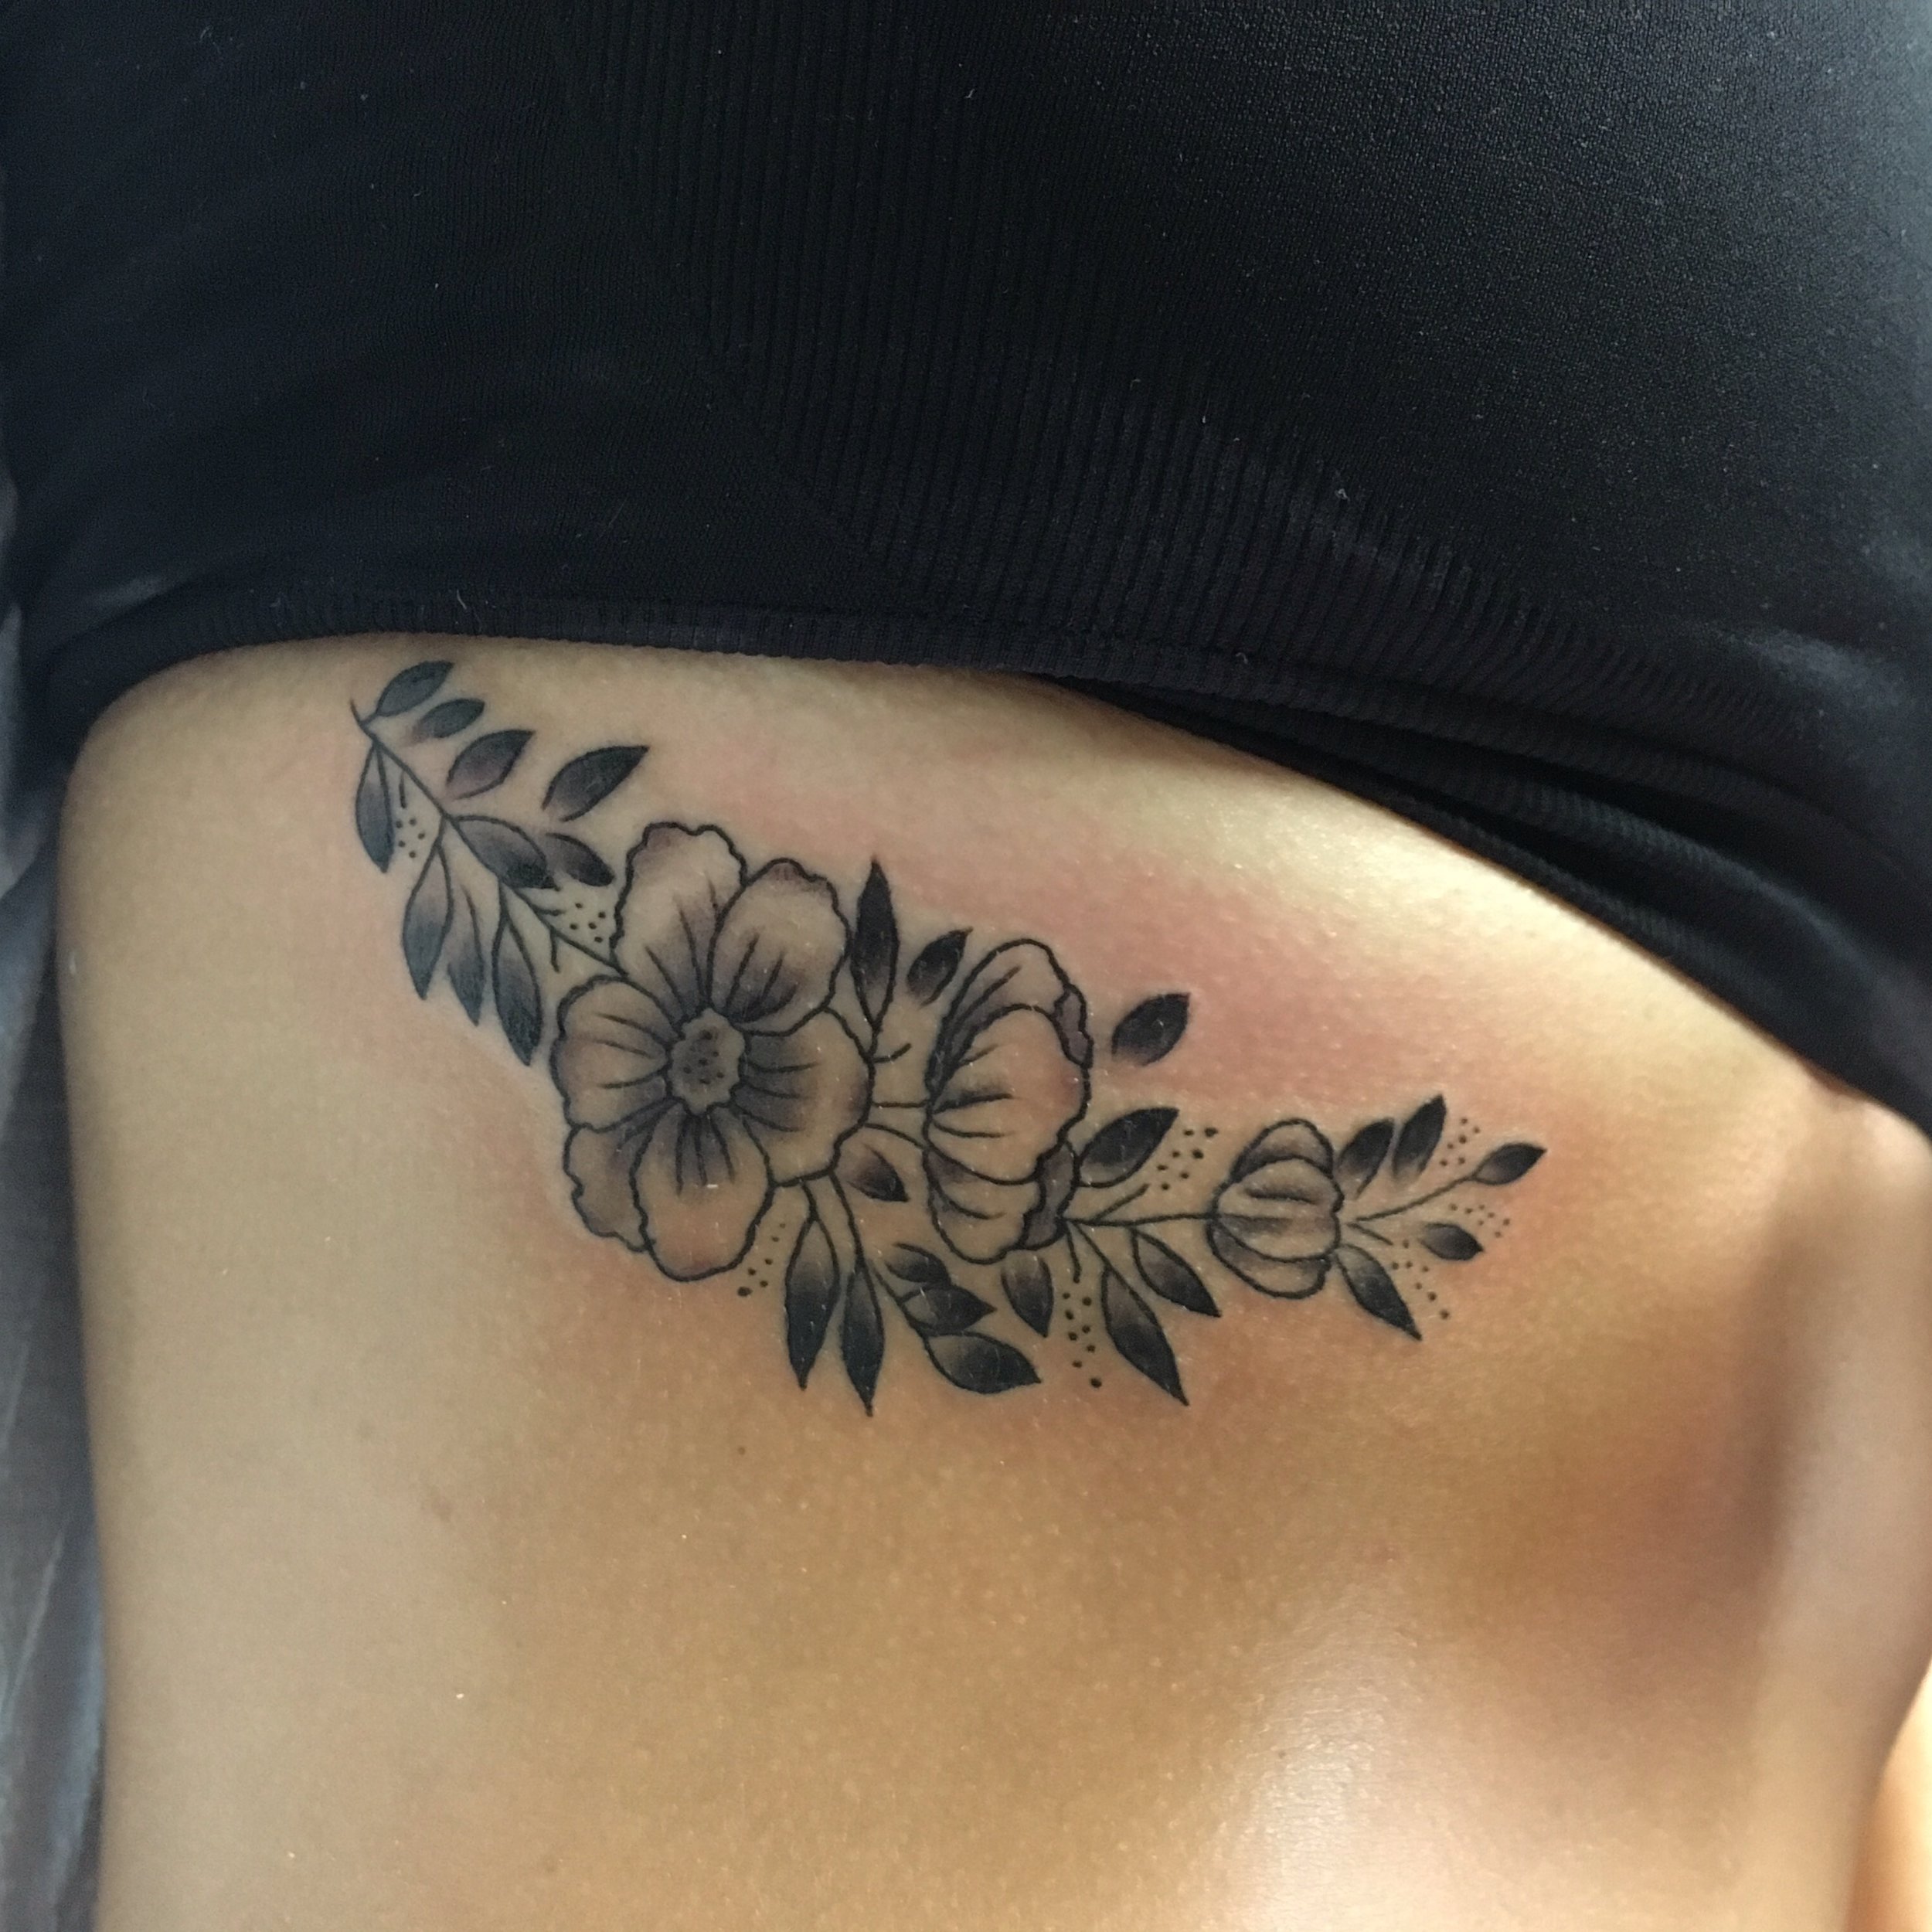 33 Stunning Flower Tattoos That Radiate Beauty and Softness! – SORTRA